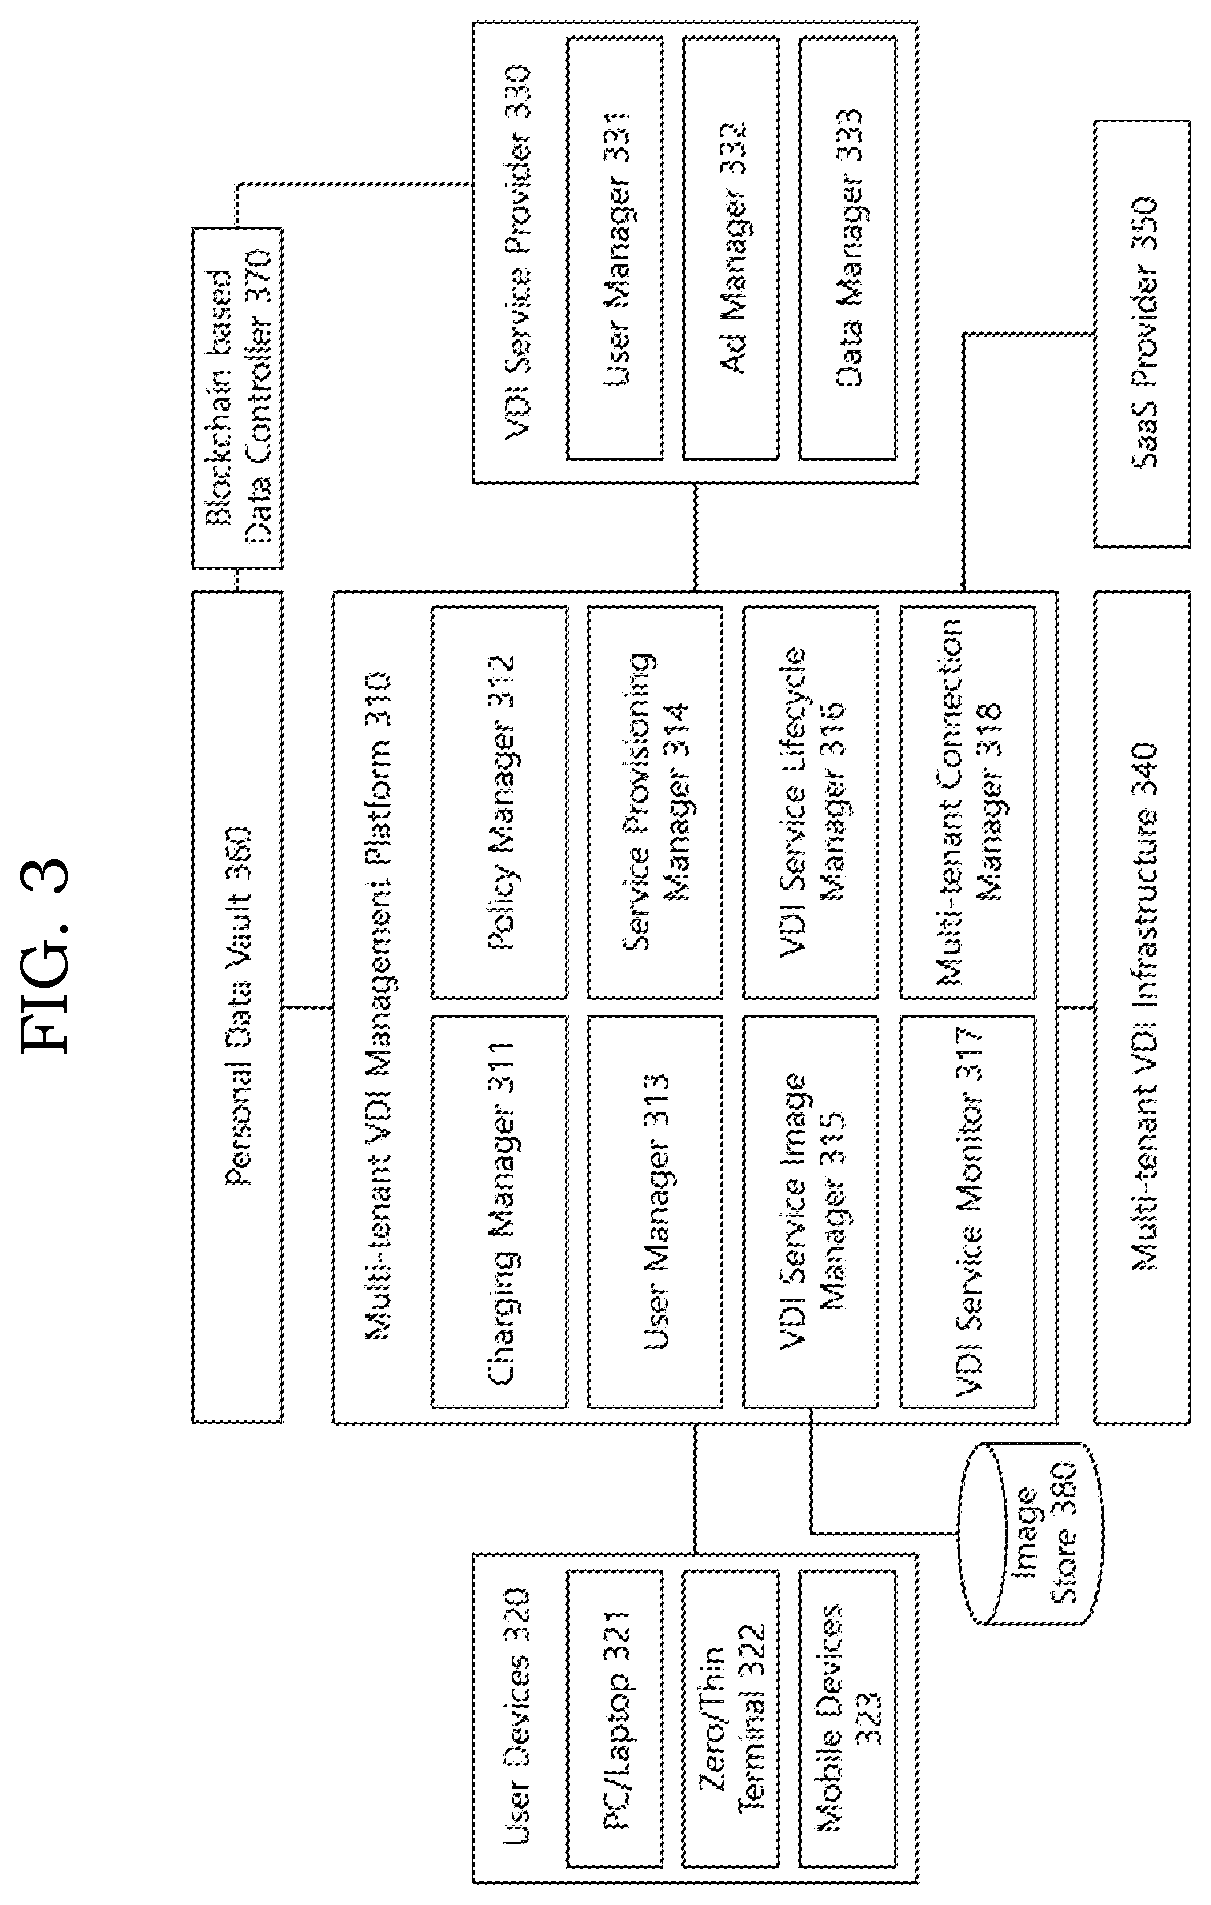 Method and system for collecting user information according to providing virtual desktop infrastructure service